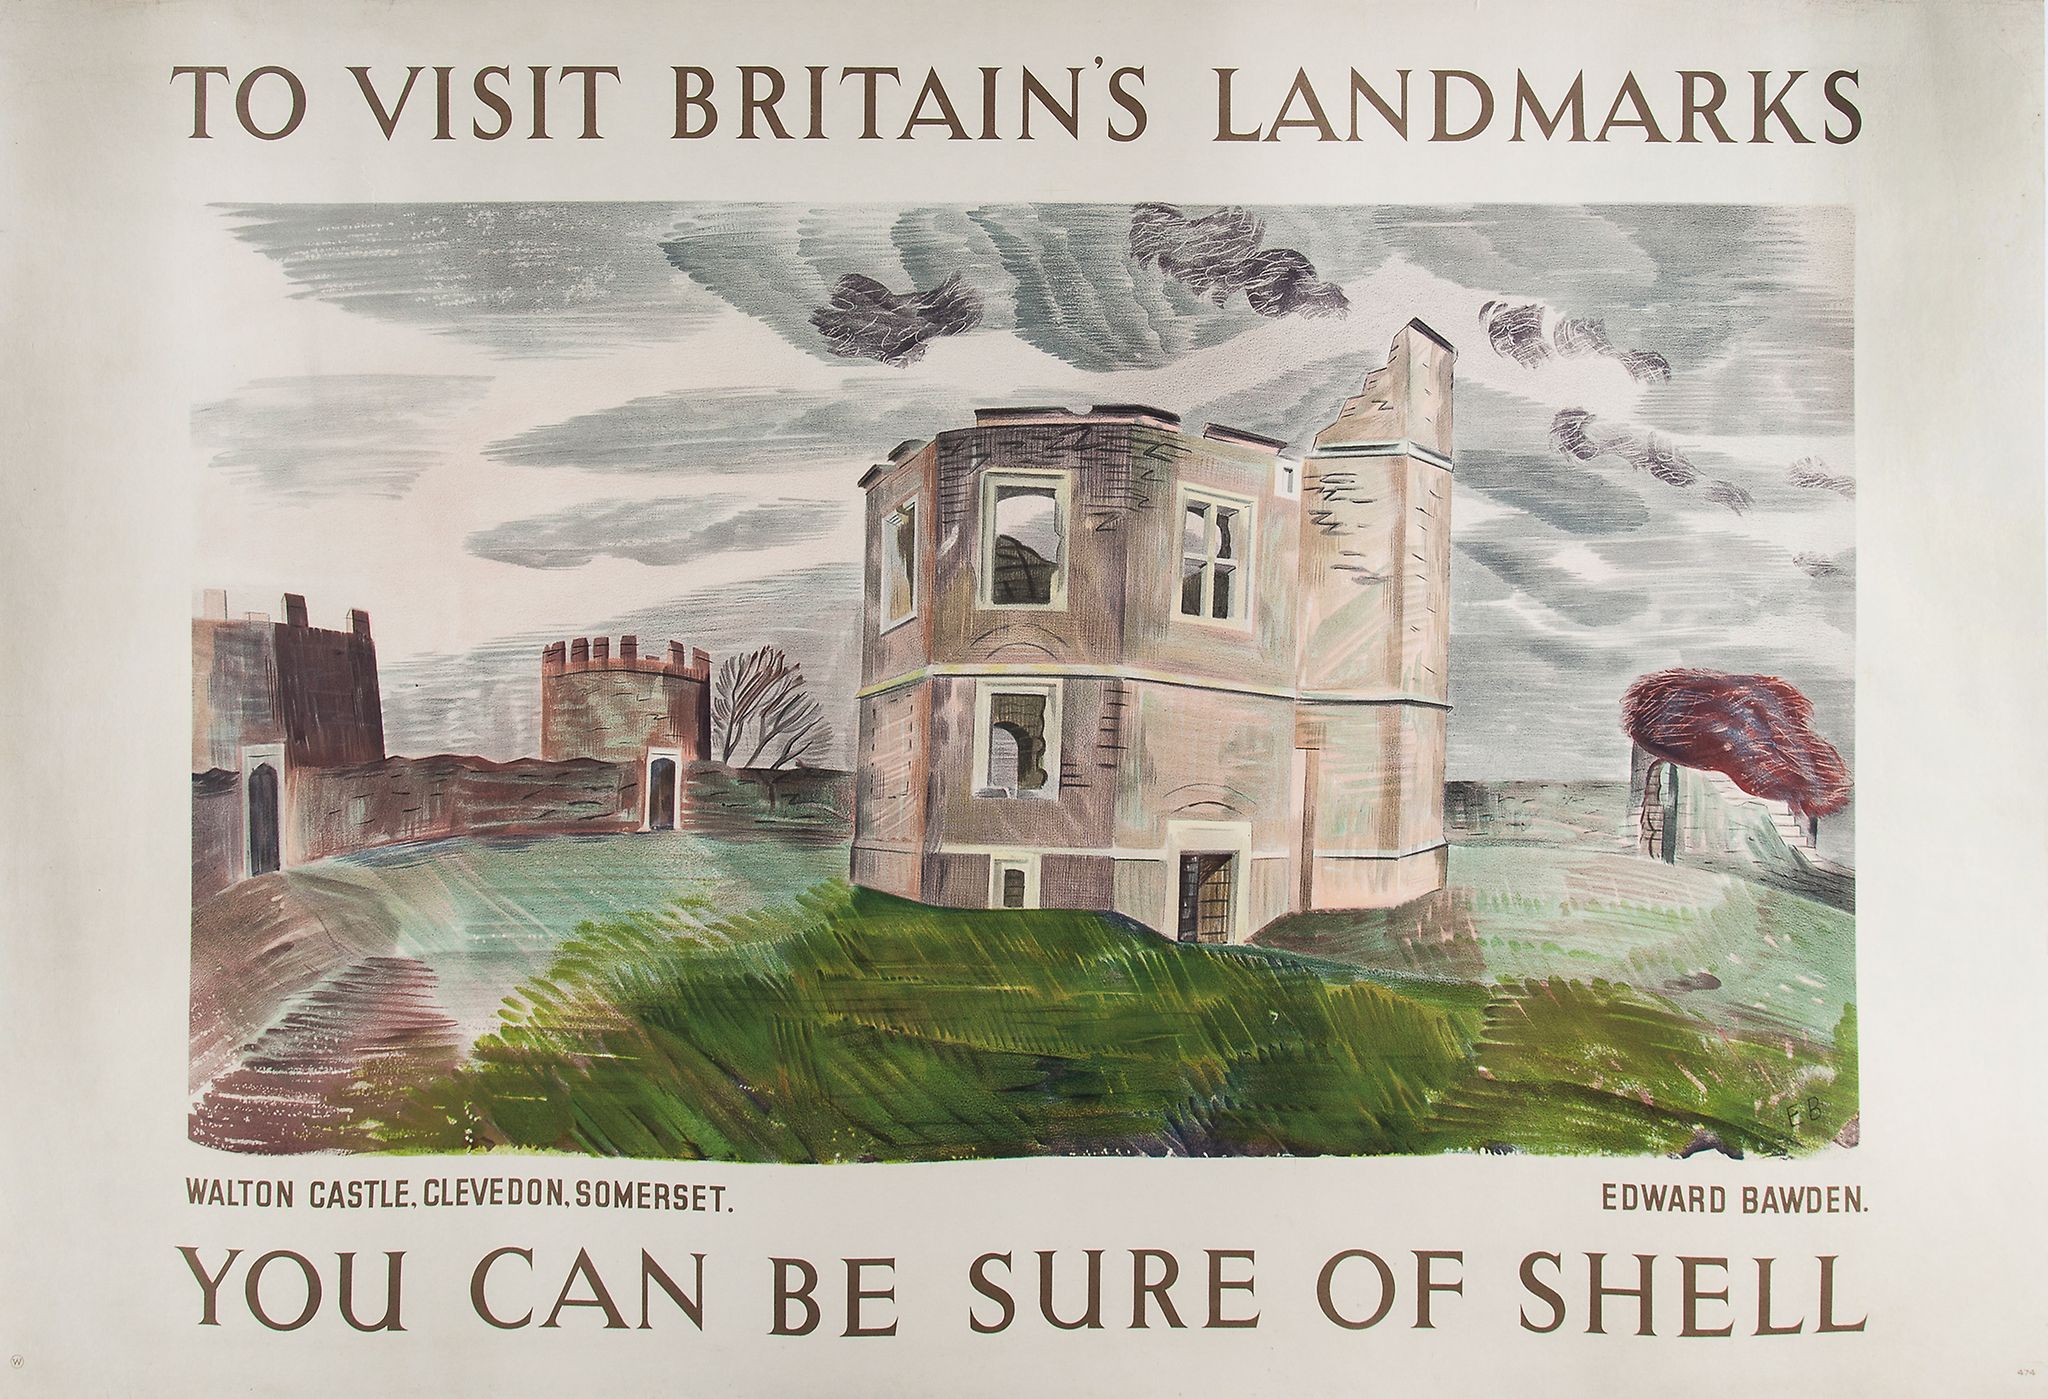 Bawden (Edward) - Walton Castle, Clevedon, Somerset.  You Can Be Sure of Shell, Britain's Landmark